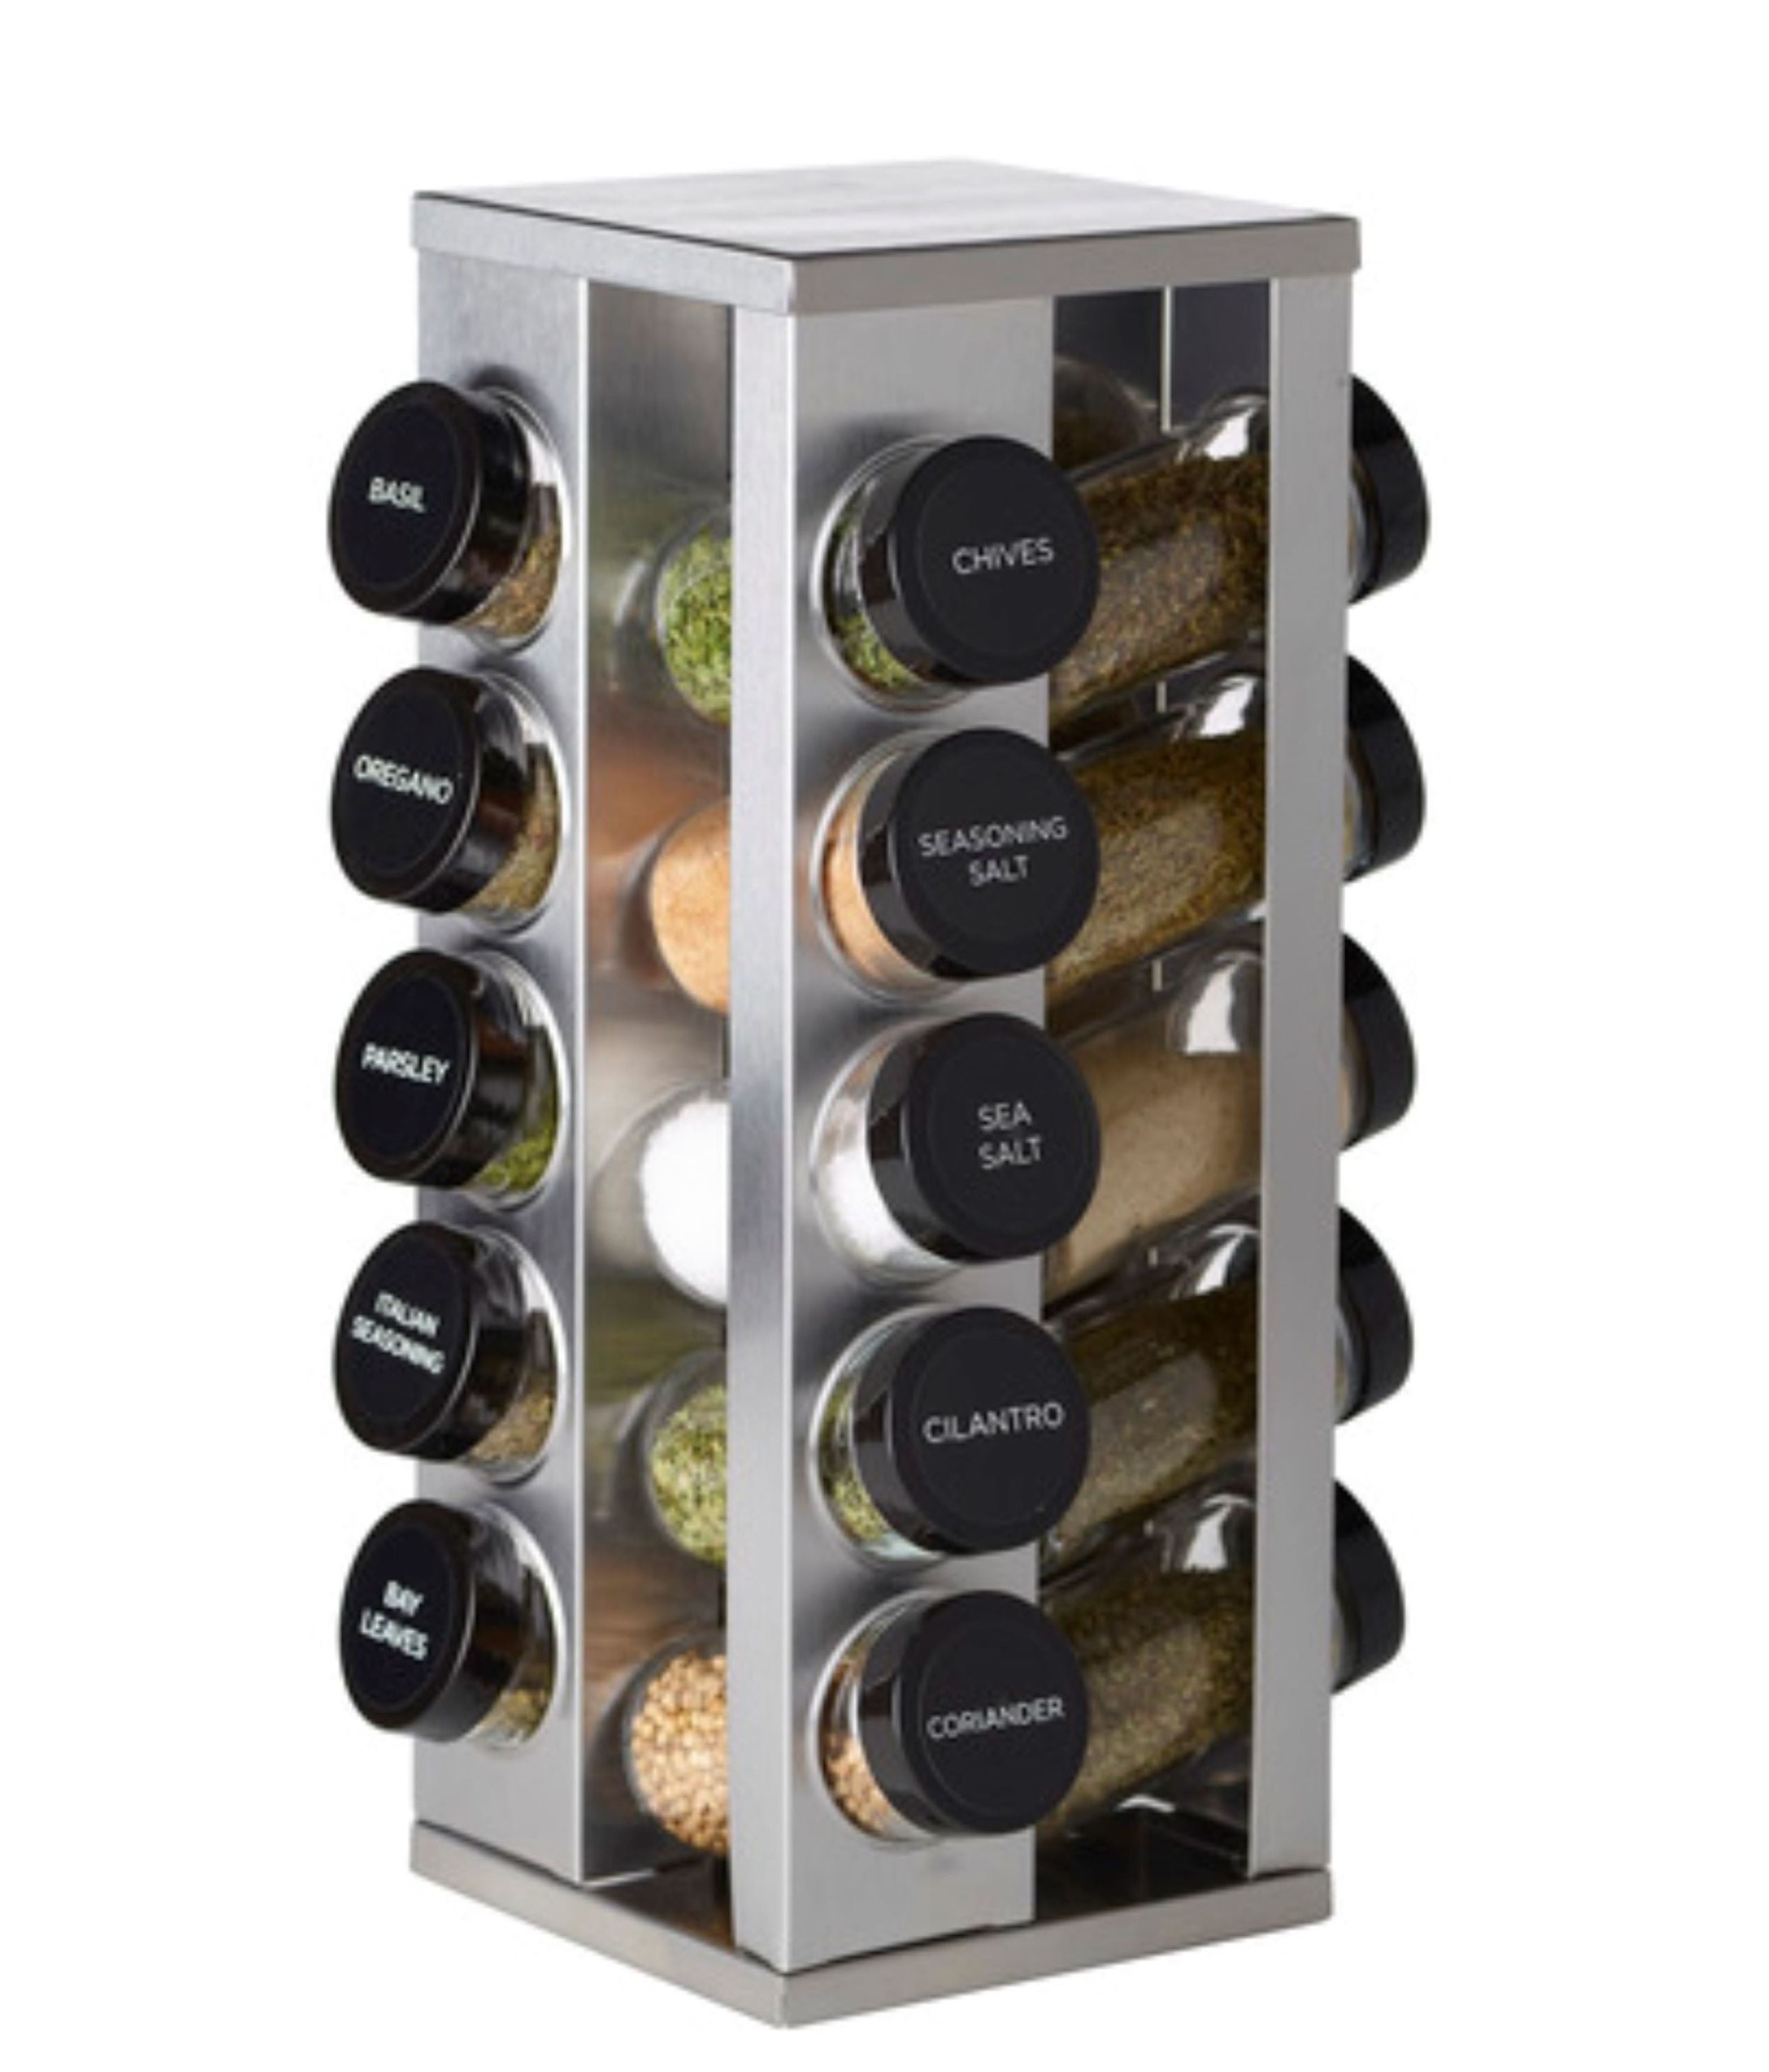 16-Cube Bamboo Spice Rack + Reviews